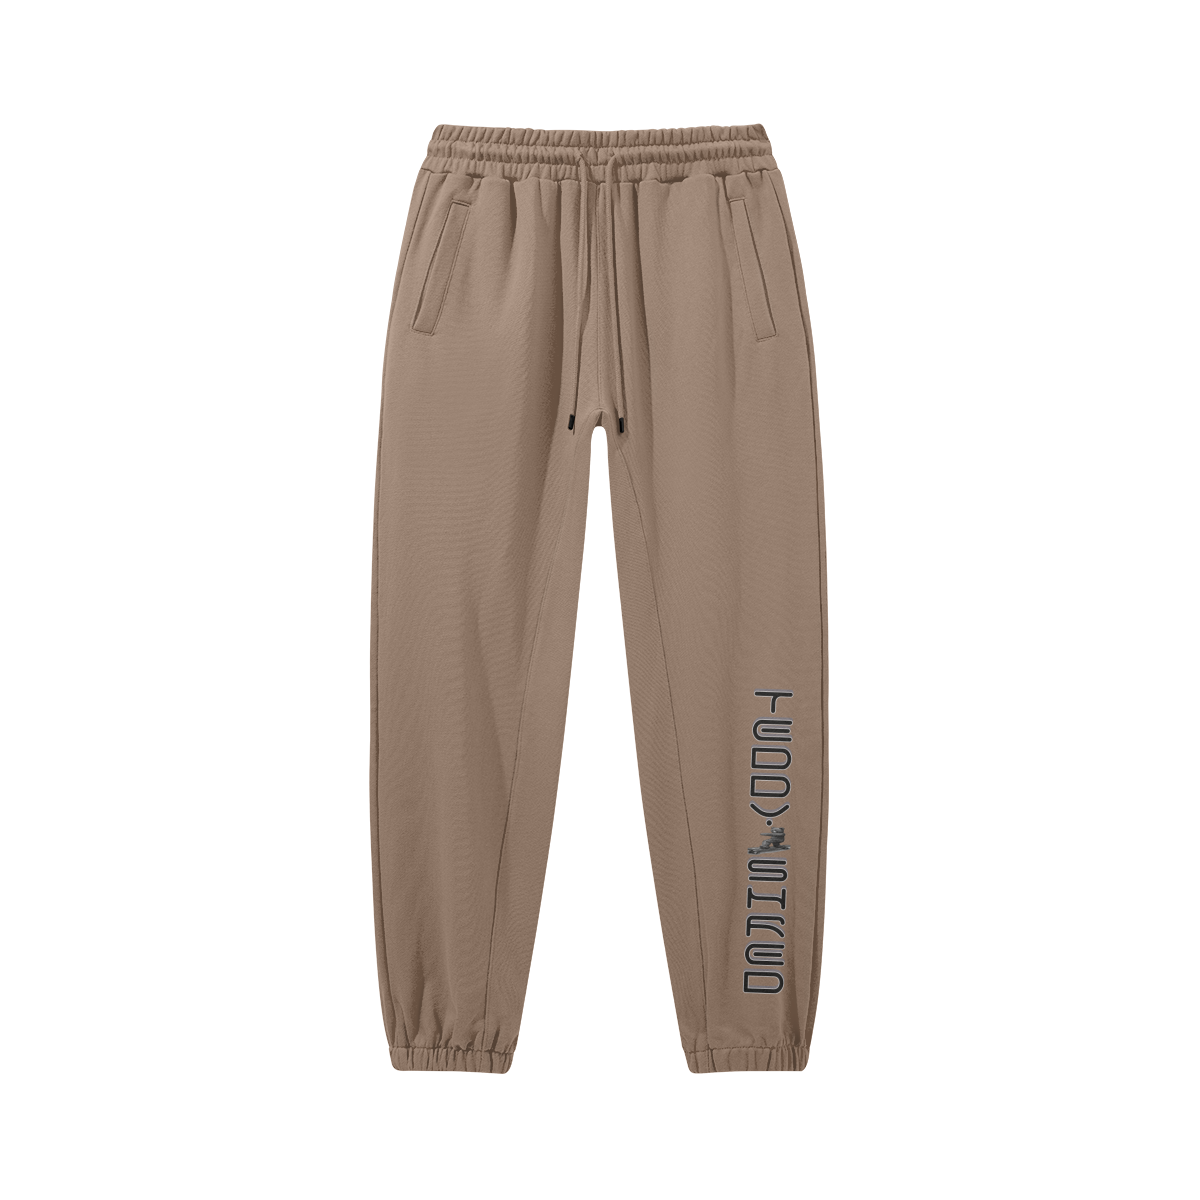 Beaver - Teddy Ride Shred 380GSM Unisex Heavyweight Baggy Sweatpants - unisex sweatpants at TFC&H Co.